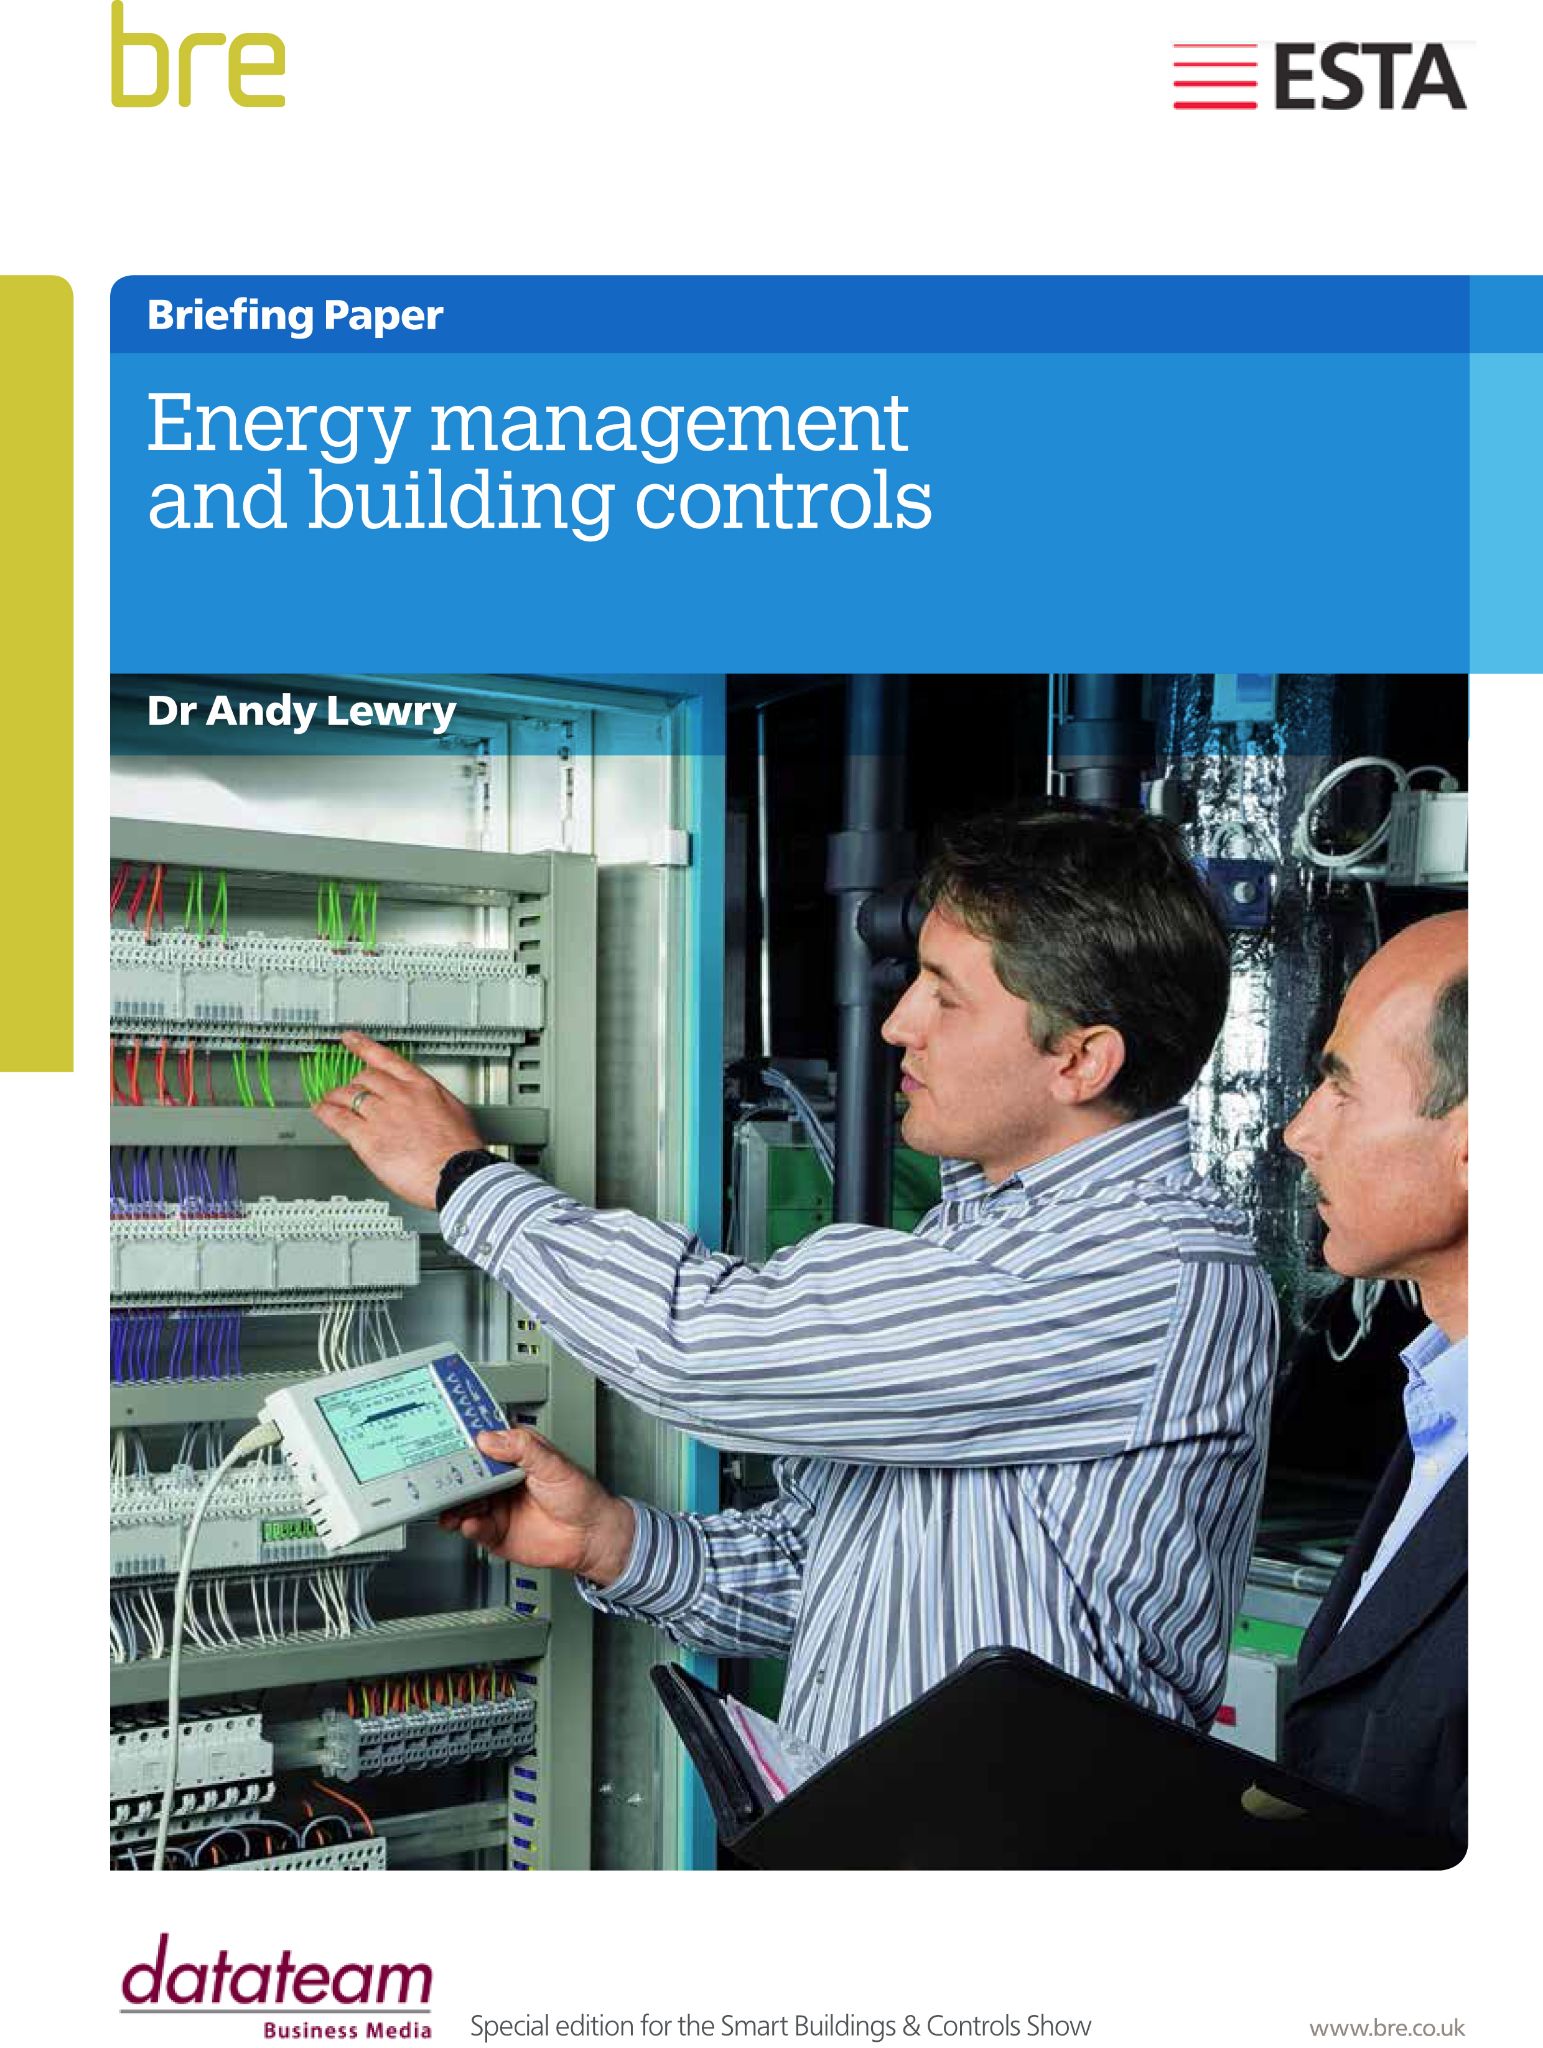 New straightforward guide to Energy Management and Building Controls published by BRE and ESTA